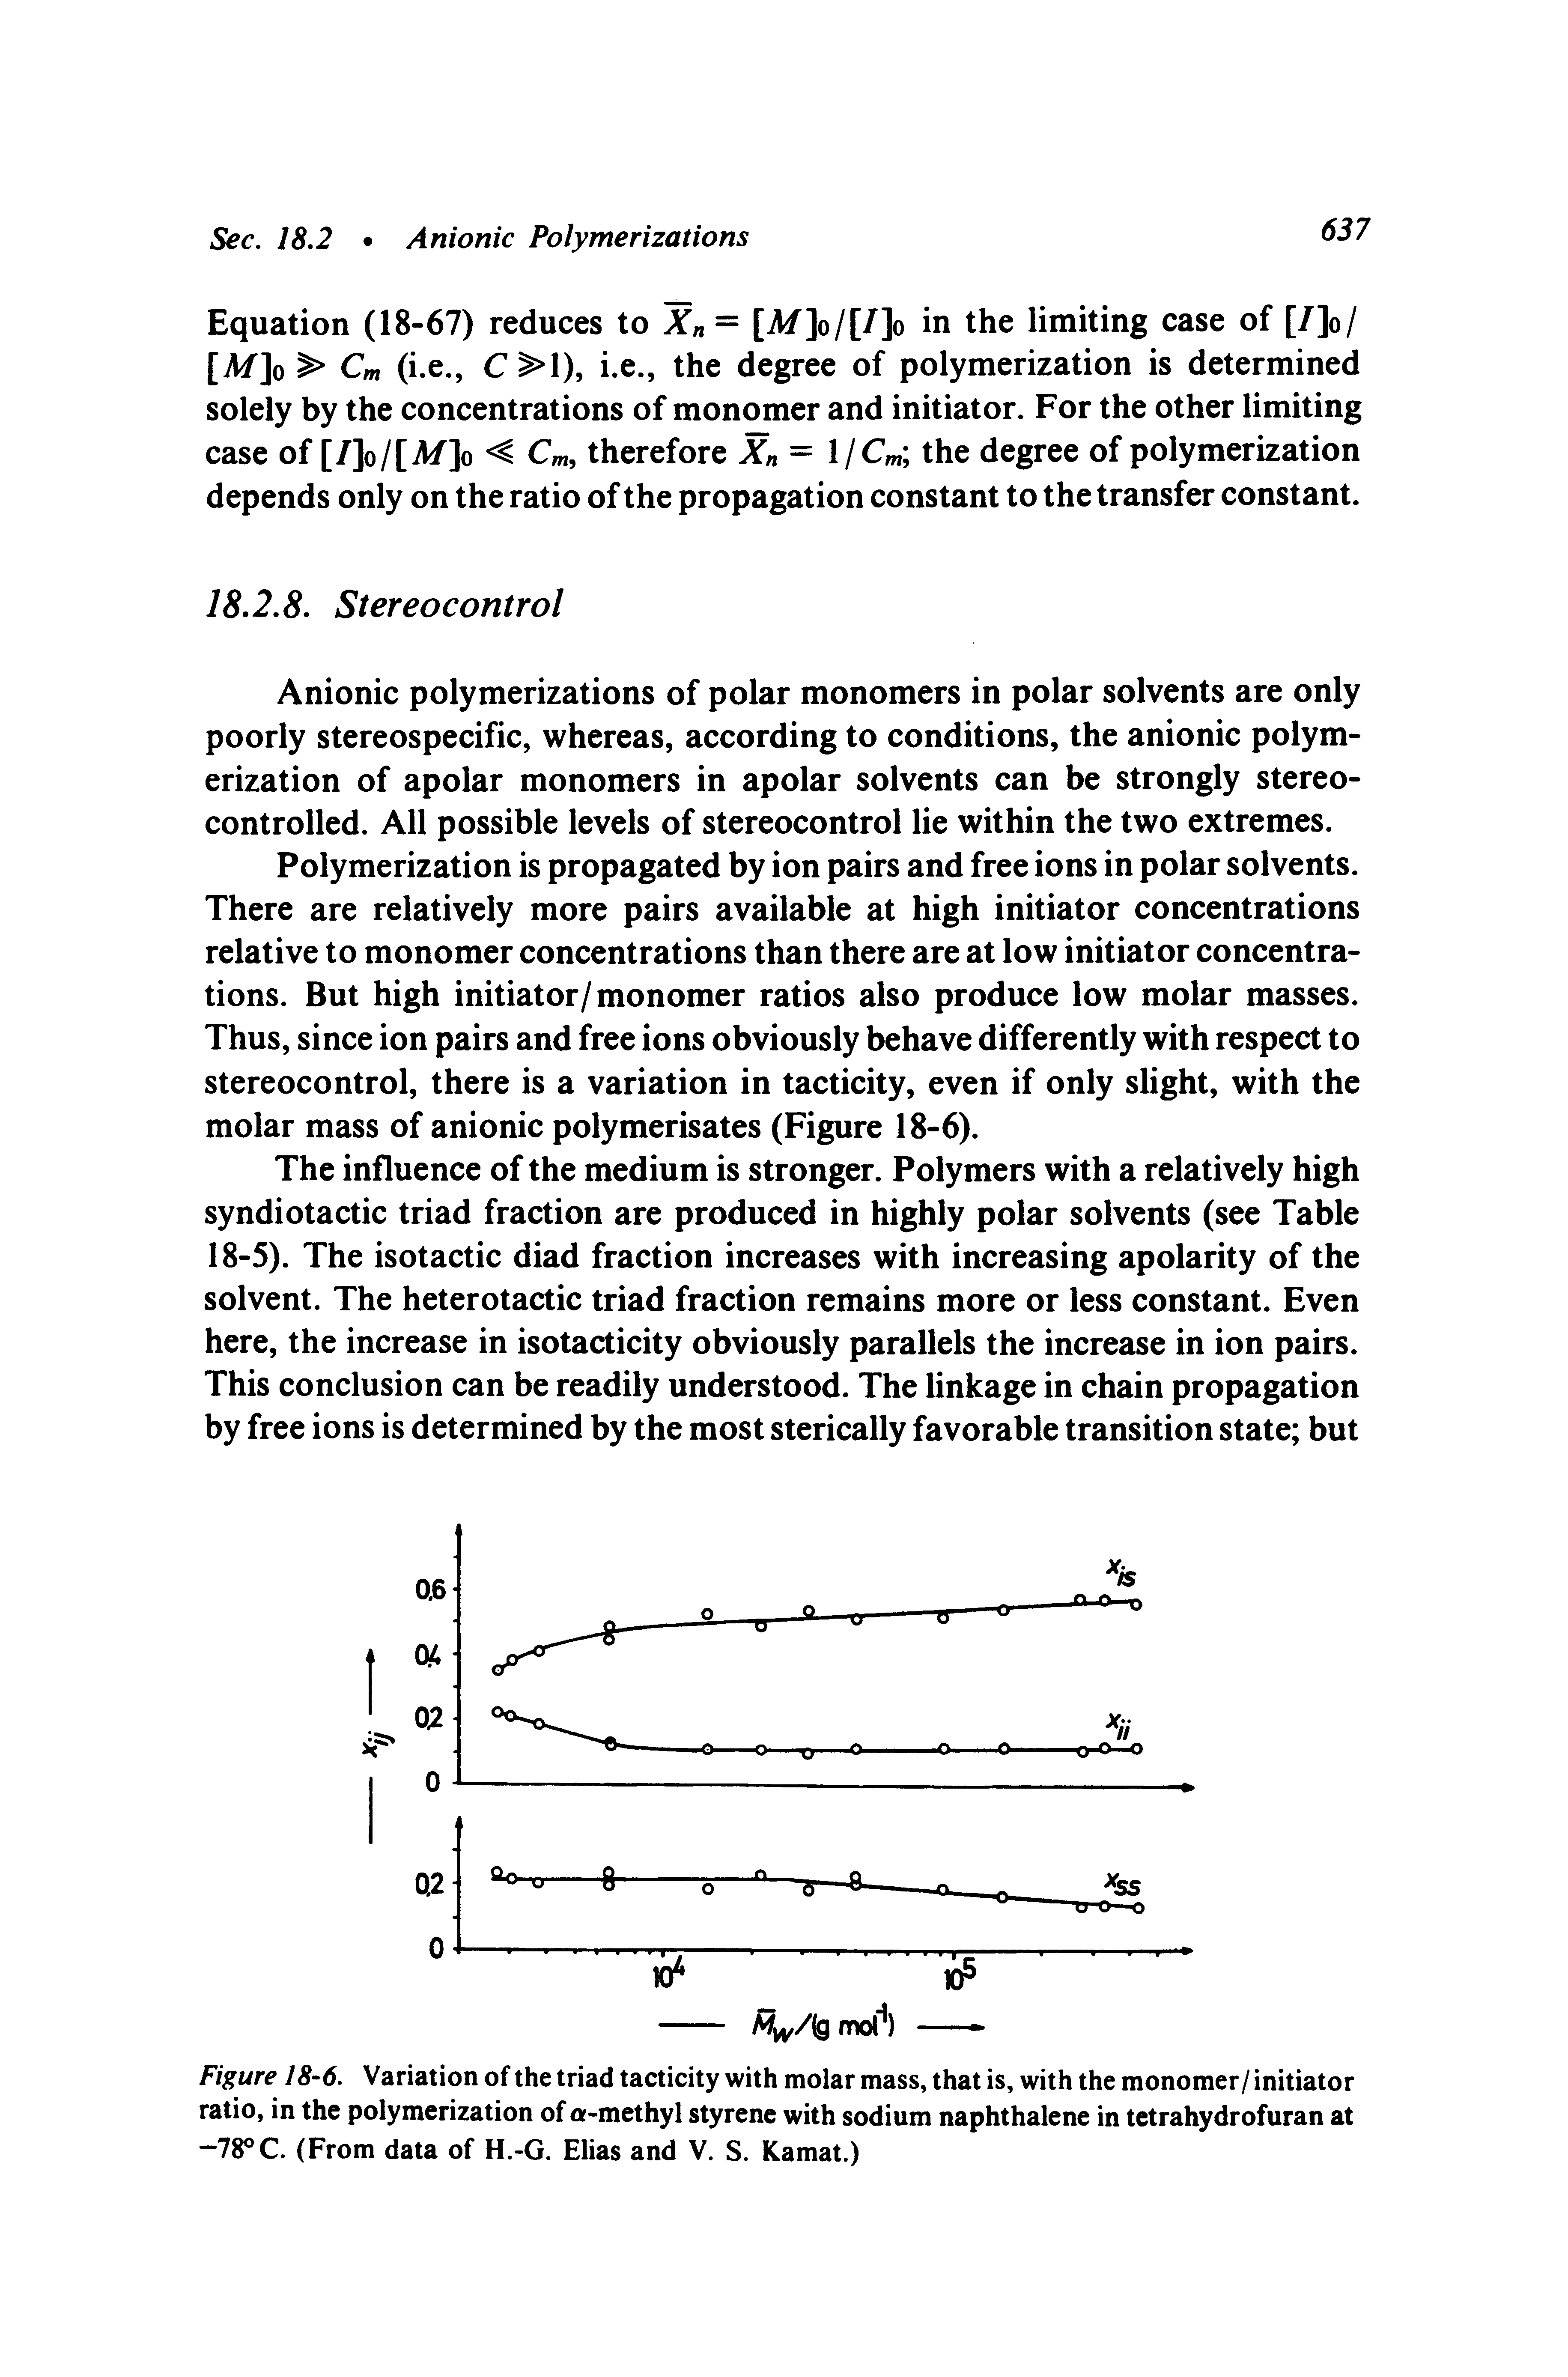 Figure 18-6. Variation of the triad tacticity with molar mass, that is, with the monomer/ initiator ratio, in the polymerization of a-methyl styrene with sodium naphthalene in tetrahydrofuran at 78° C. (From data of H.-G. Elias and V. S. Kamat.)...